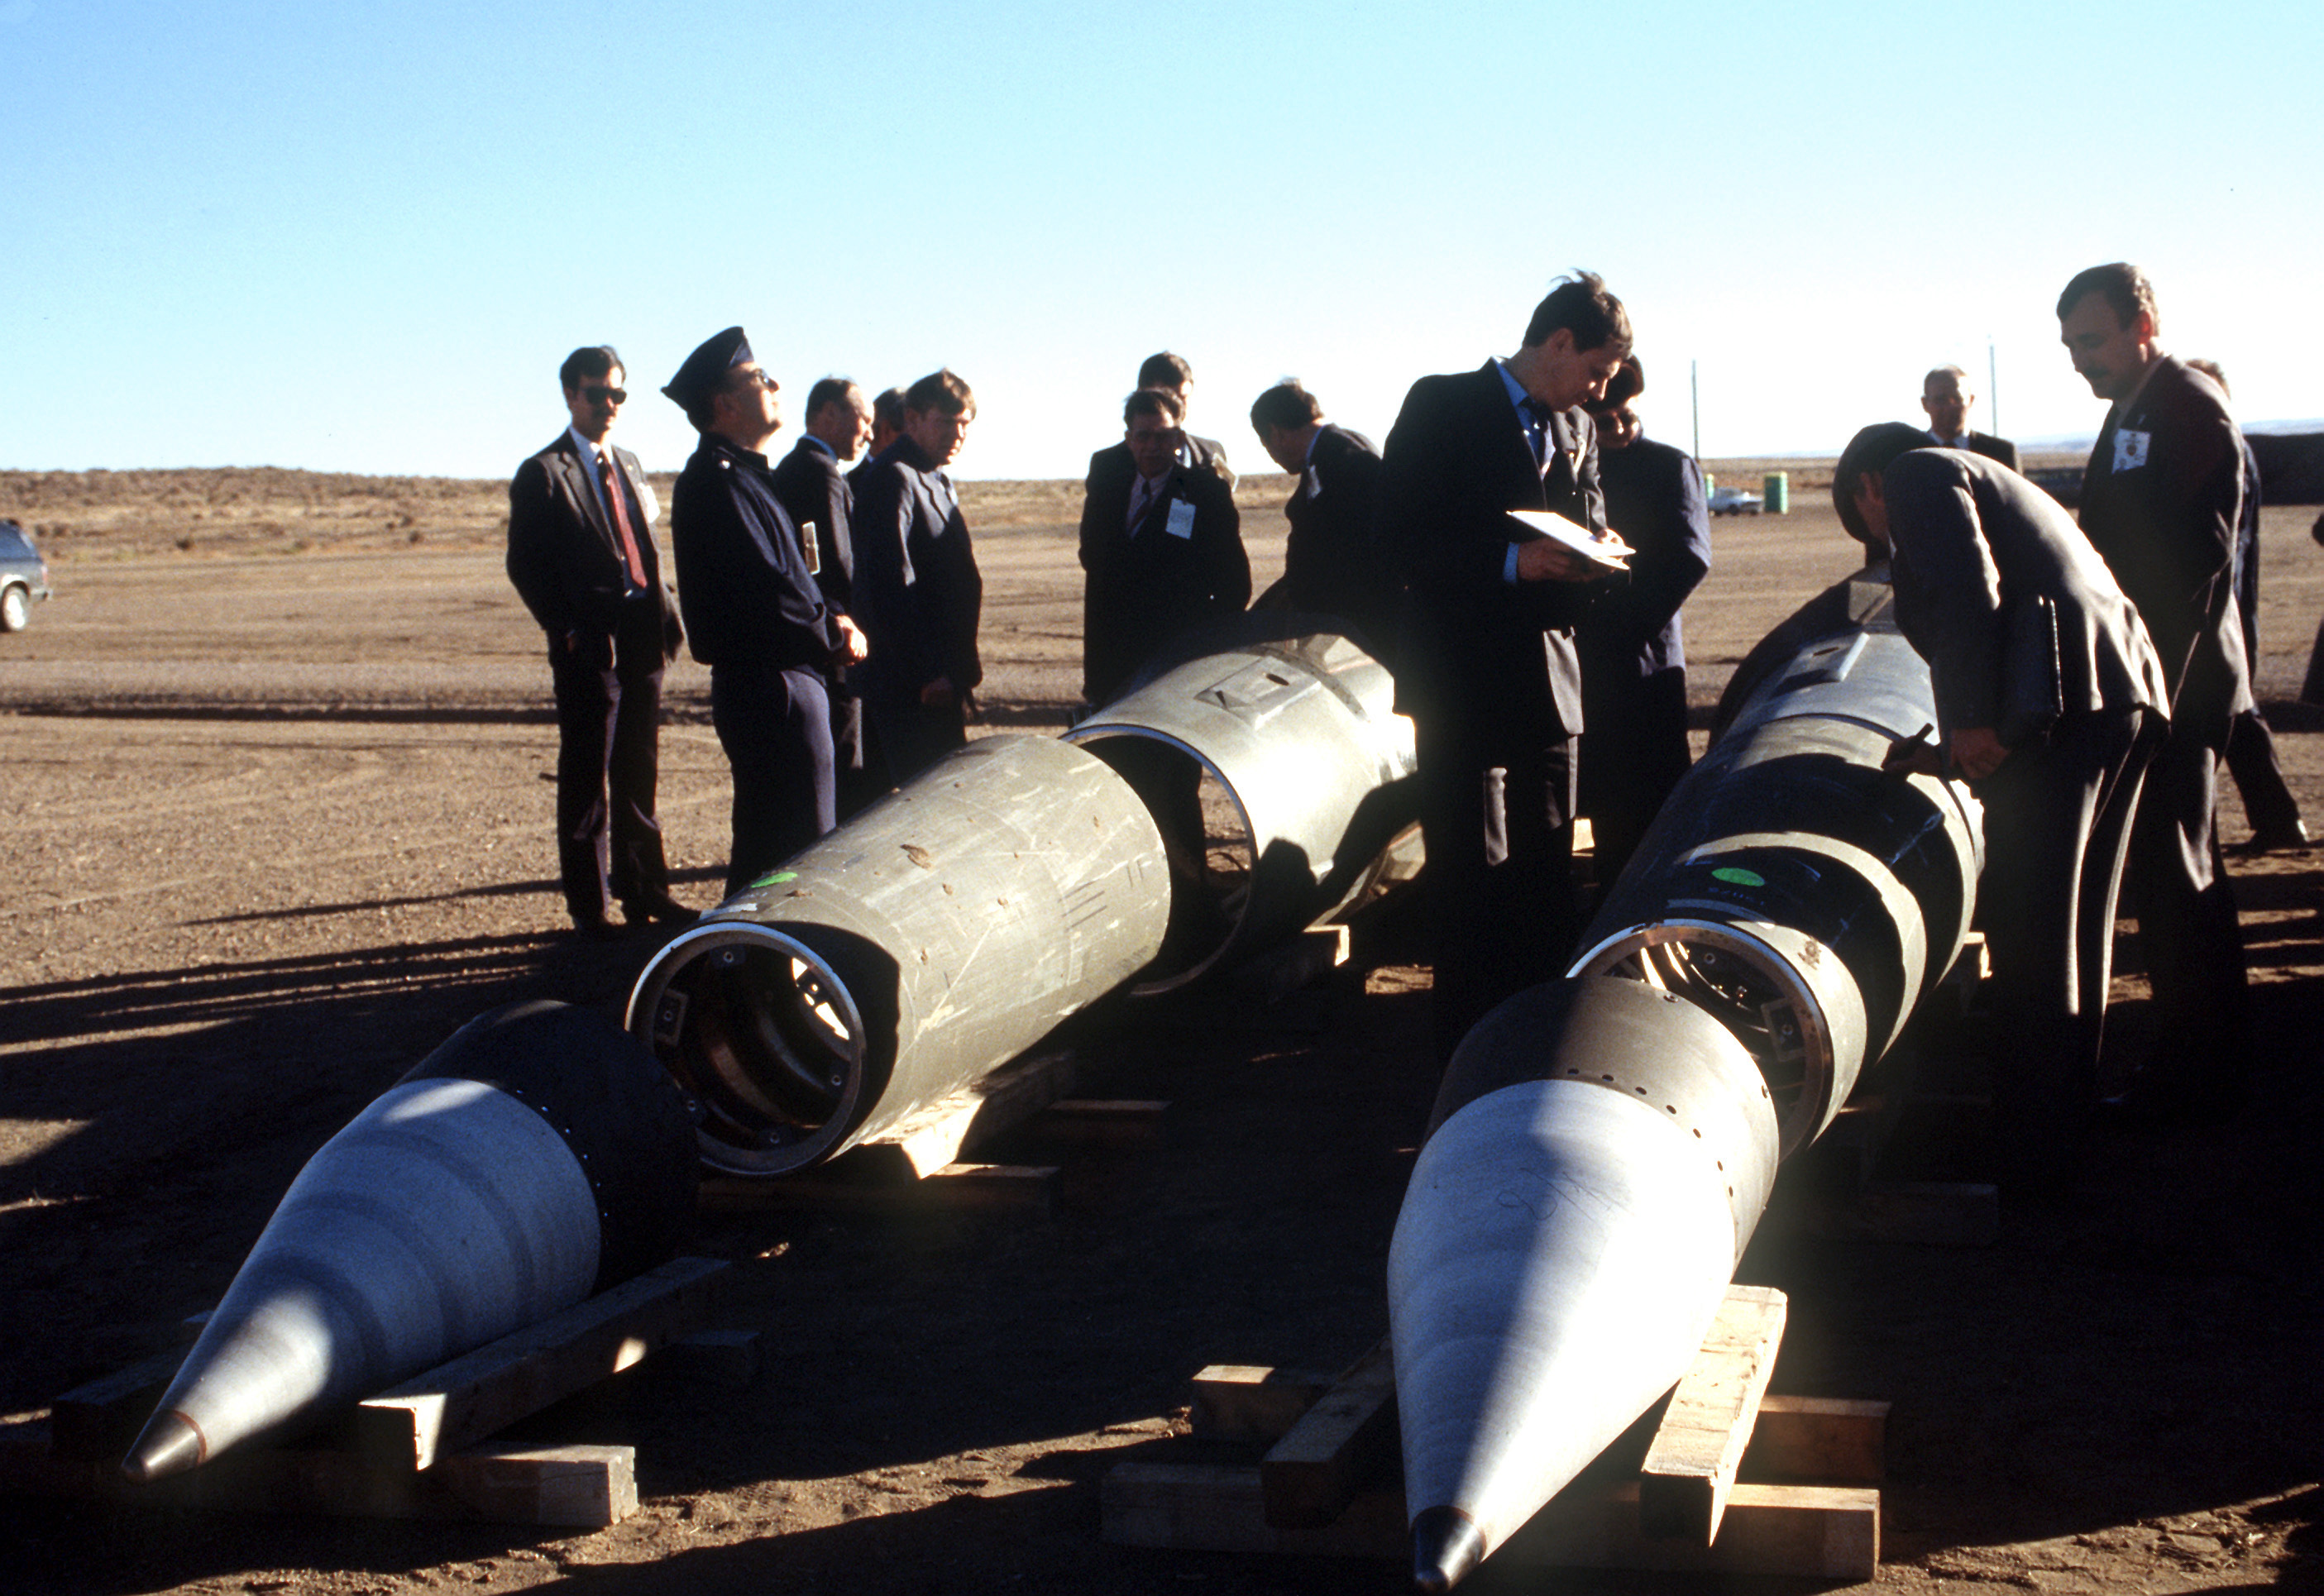 Sovjet inspectors inspecting the Pershing II missiles in 1989 under supervision of Americans as part of the INF-Treaty